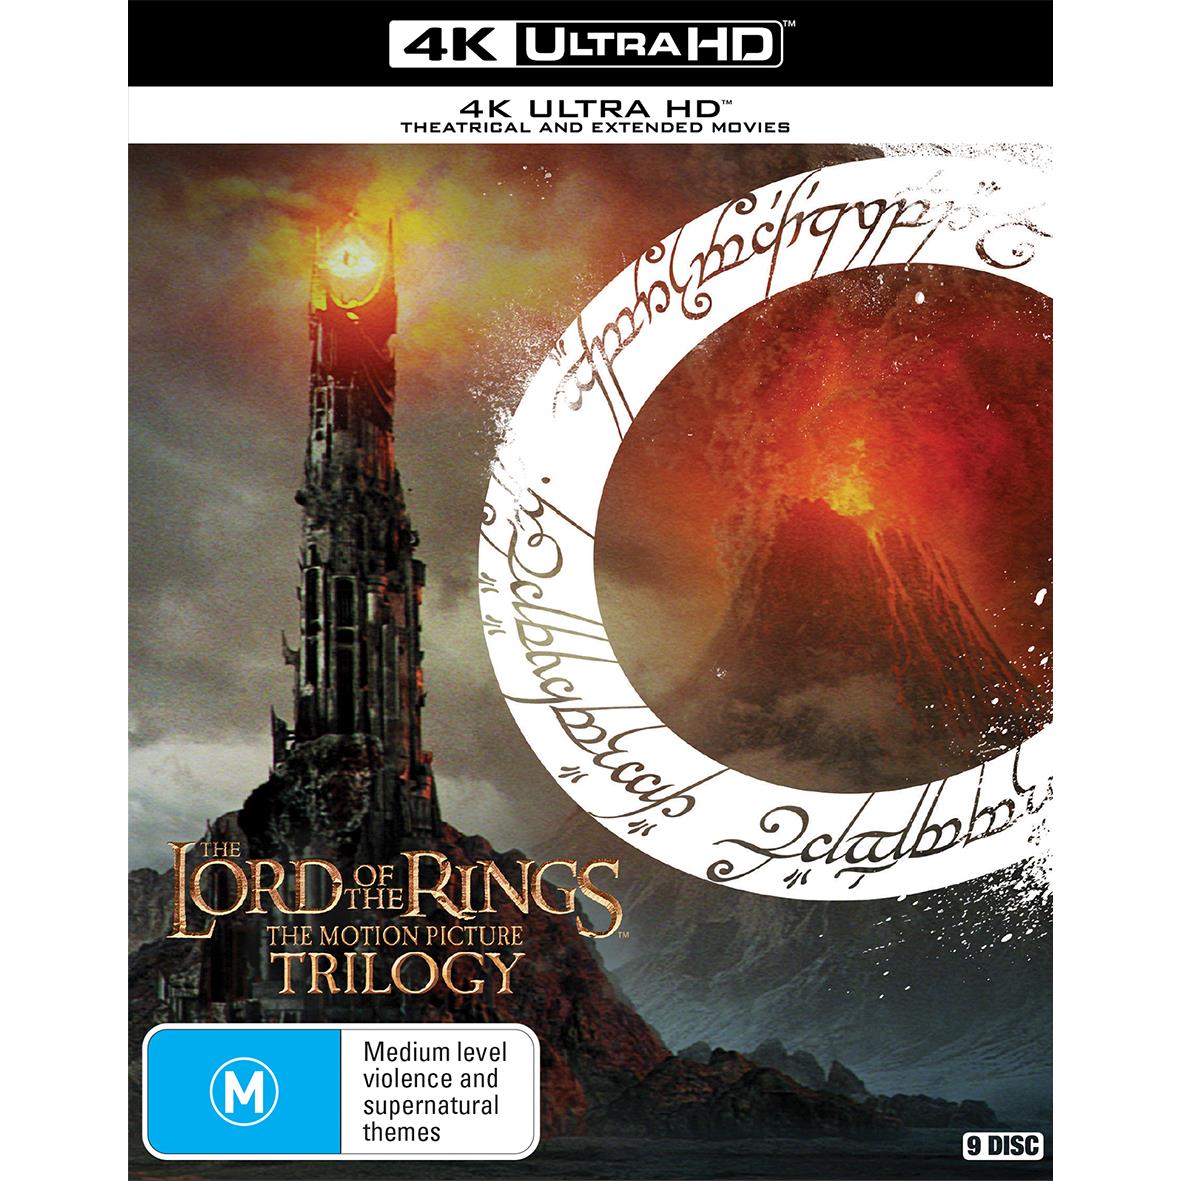 The Lord of the Rings and The Hobbit trilogies are coming to 4K Ultra HD  Blu-ray in December | TechSpot